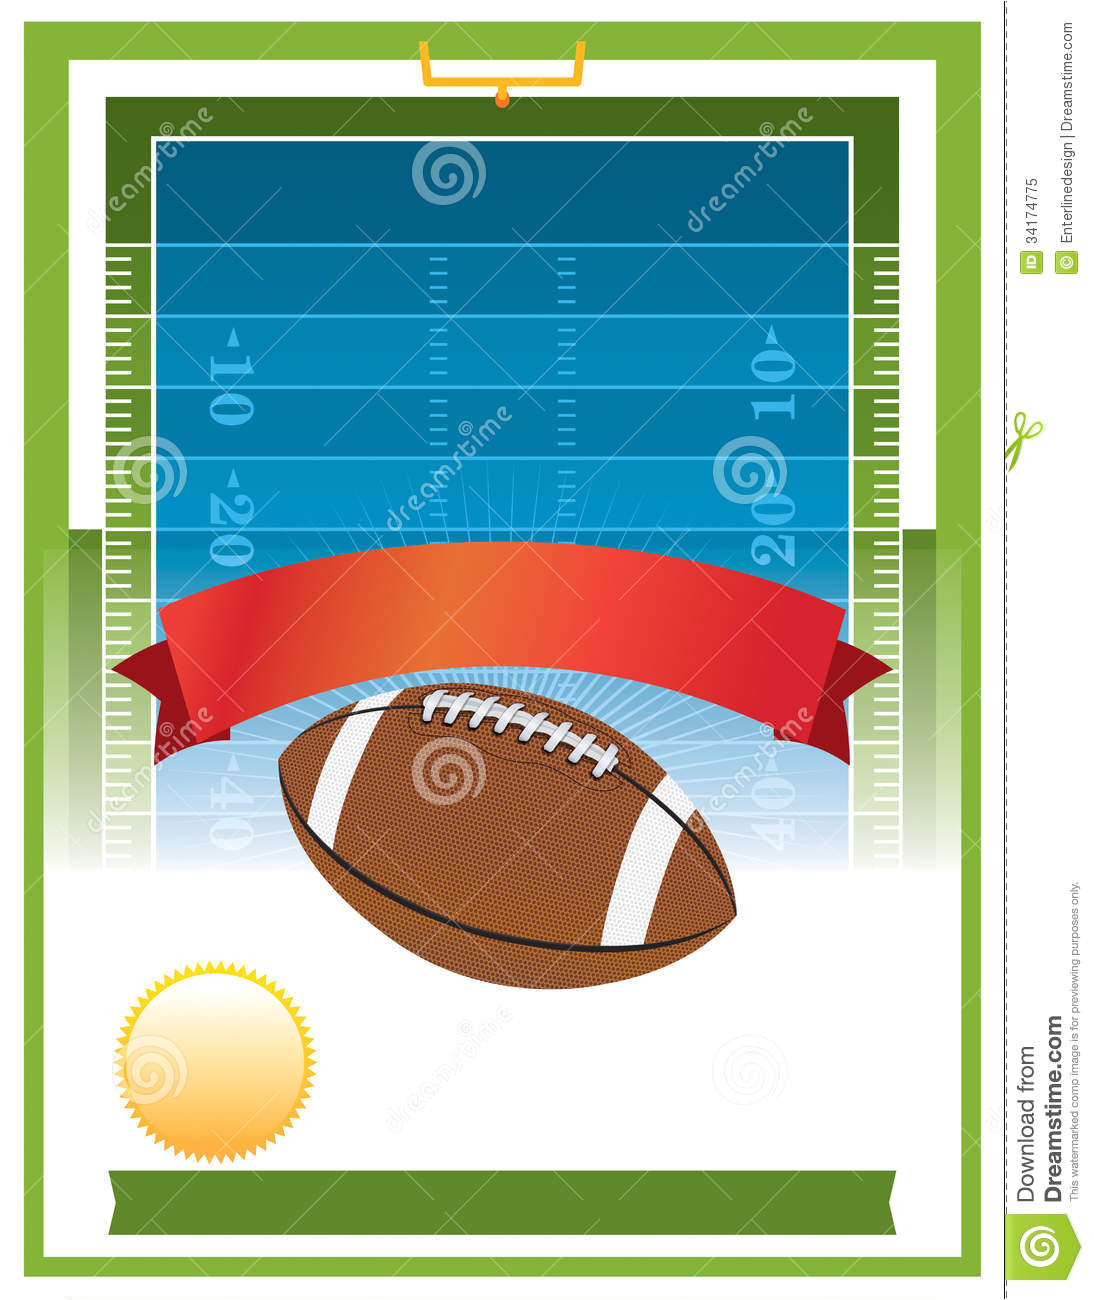 royalty free stock photo american football tailgate party flyer design vector perfect parties invites etc eps file contains transparencies image34174775